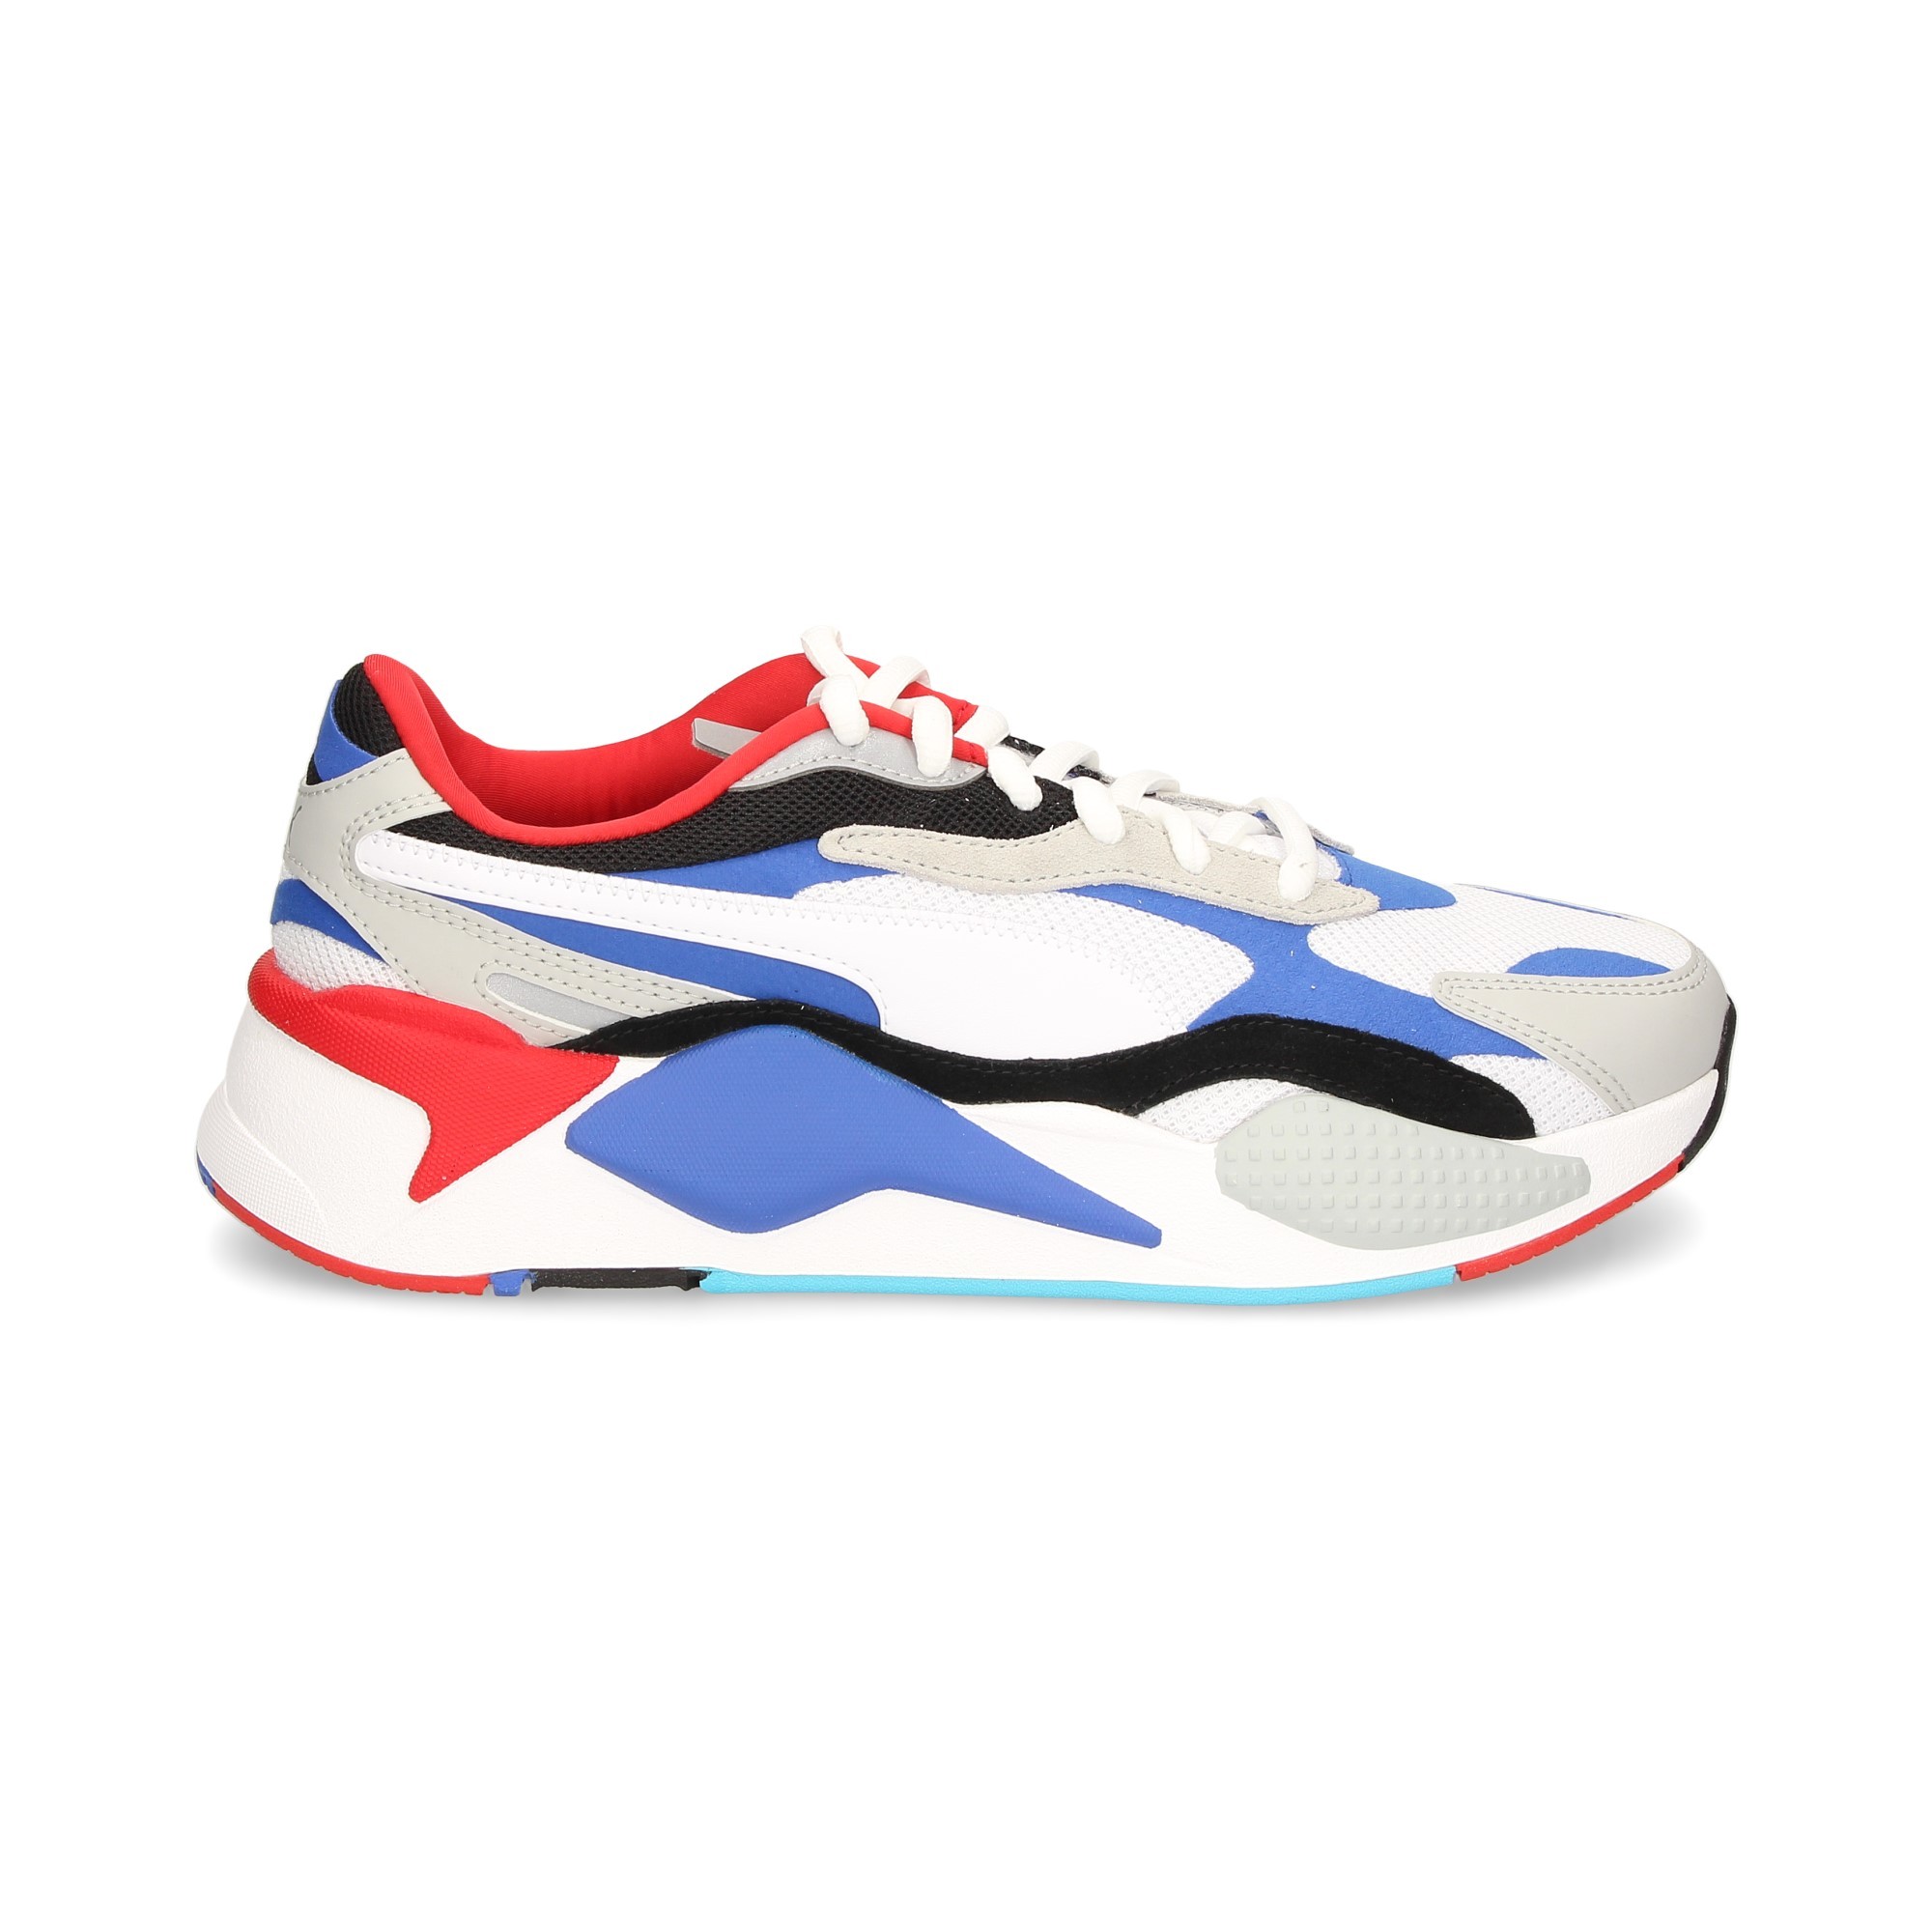 sporty-mesh-puzzle-white-blue-red